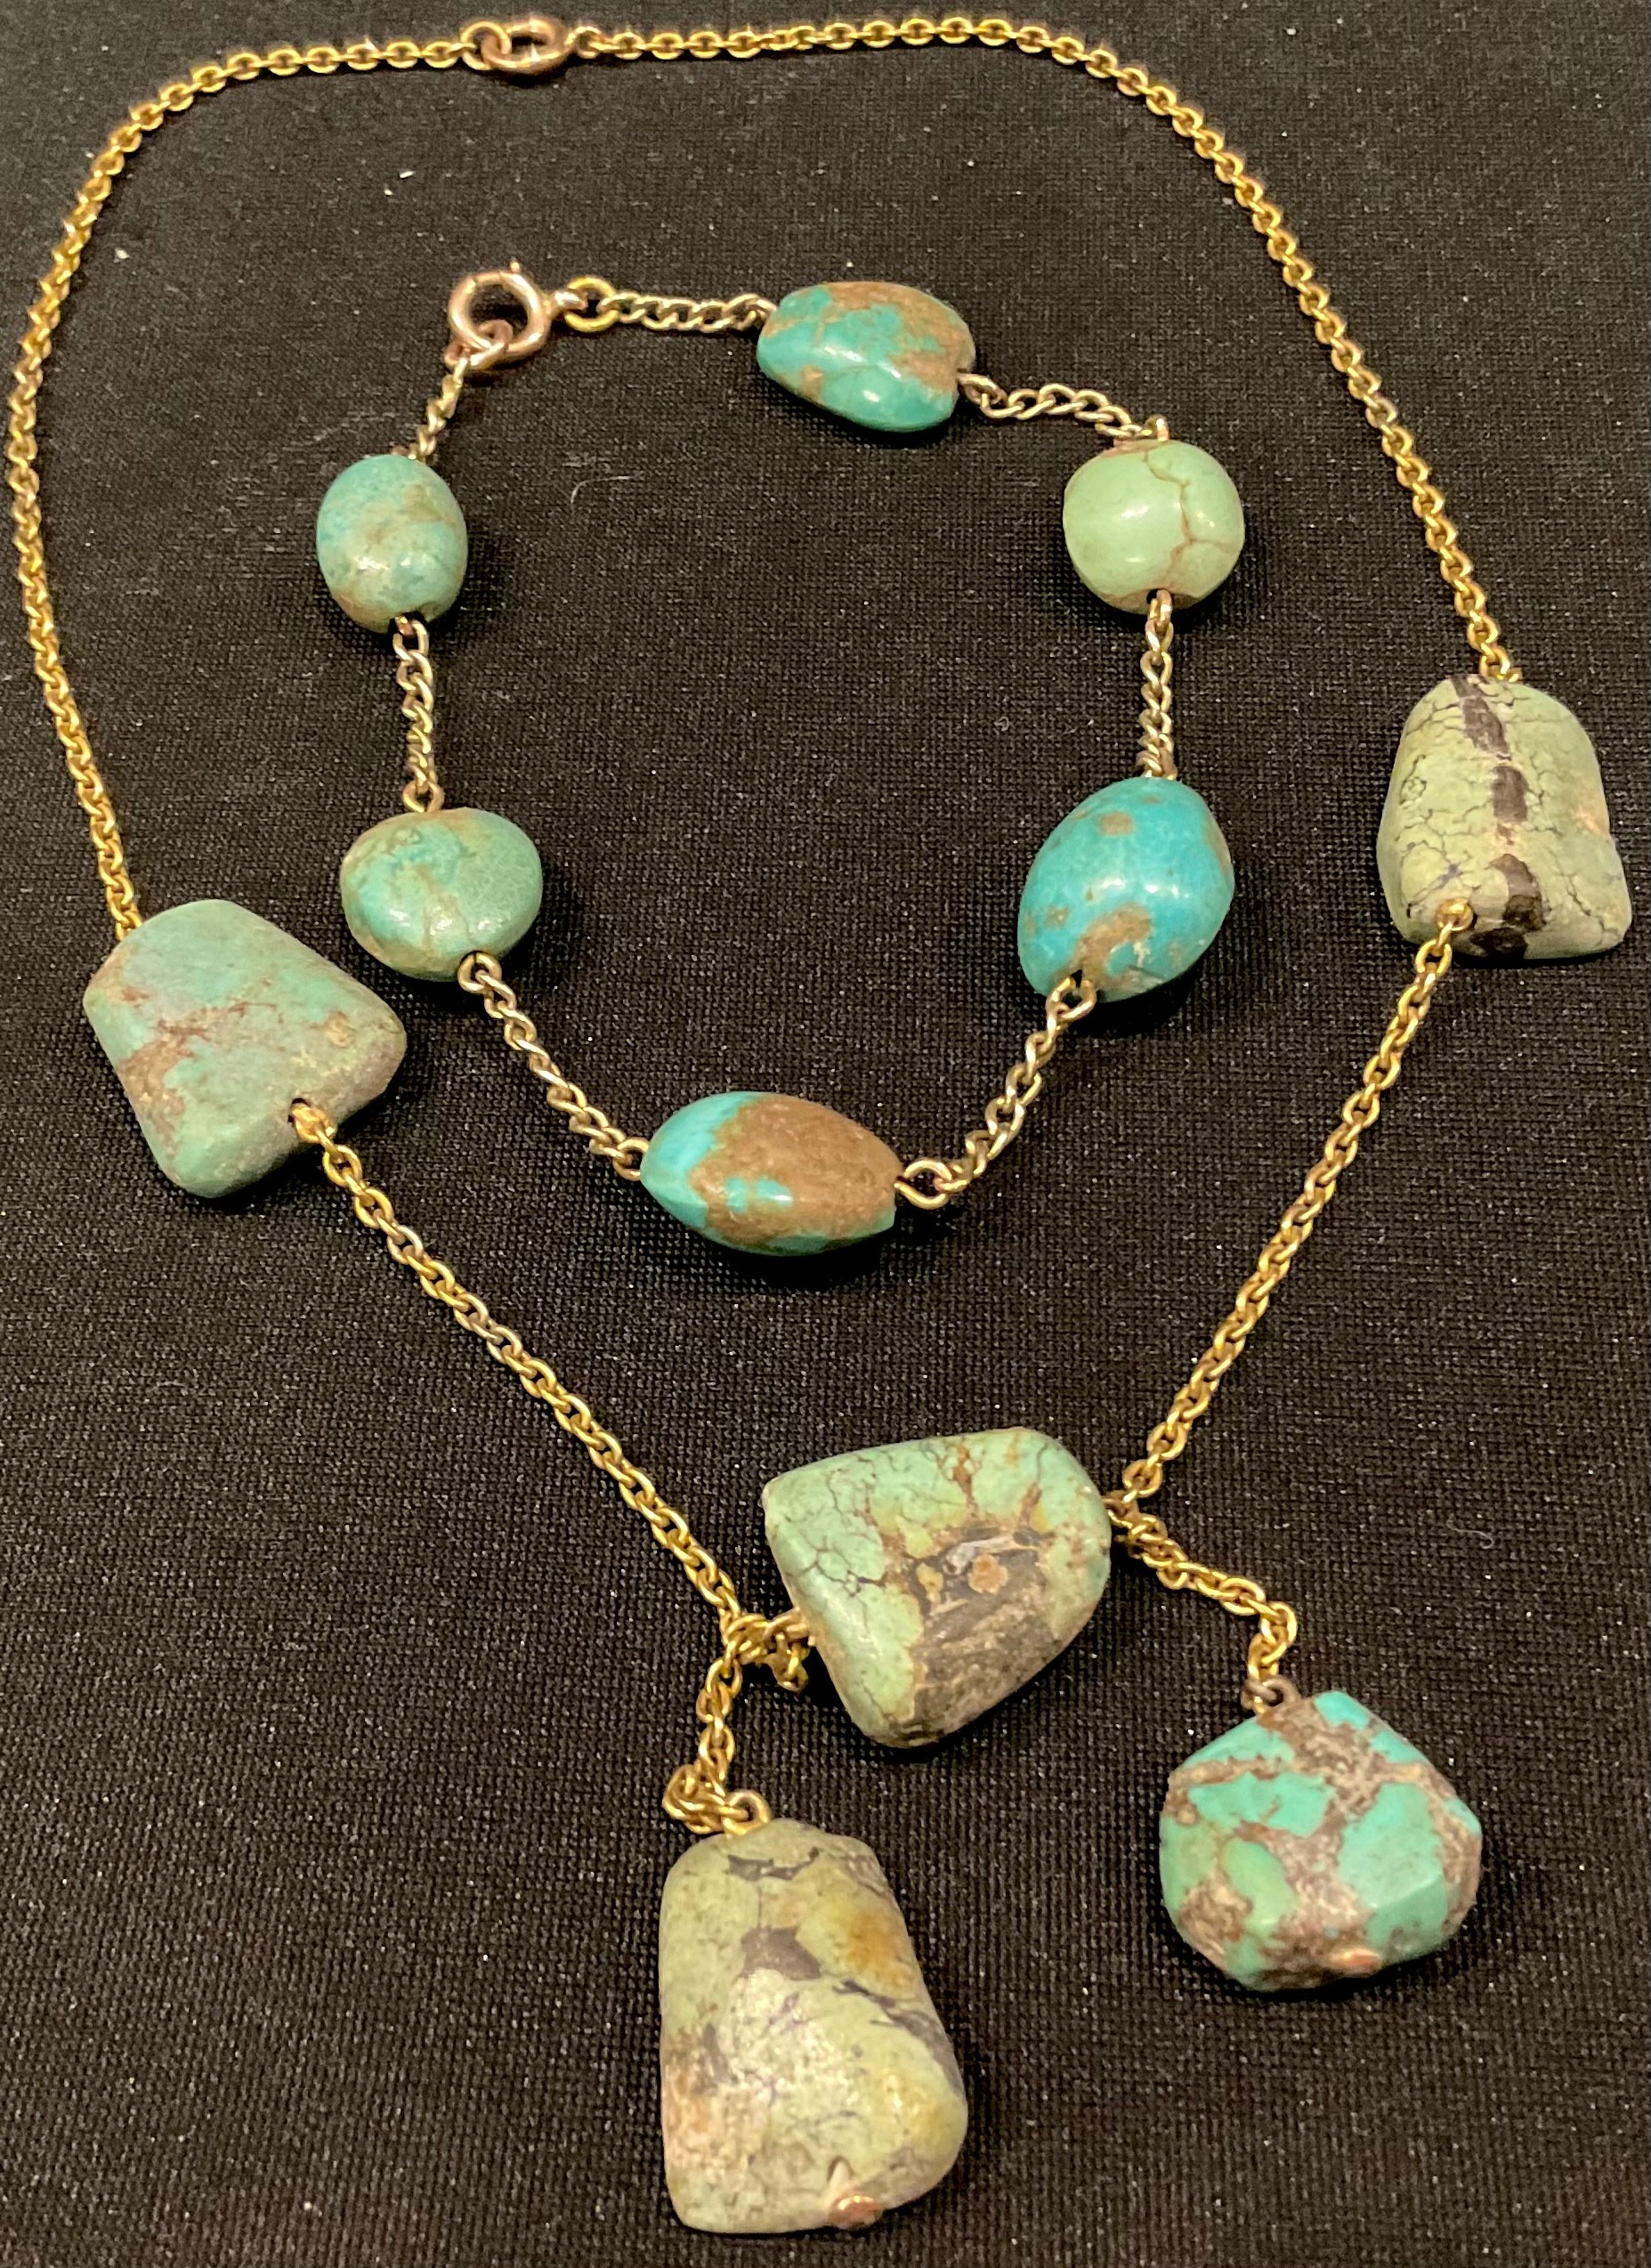 A 9ct gold and turquoise necklace, ruff cut stones; a 9ct gold and turquoise conforming bracelet (